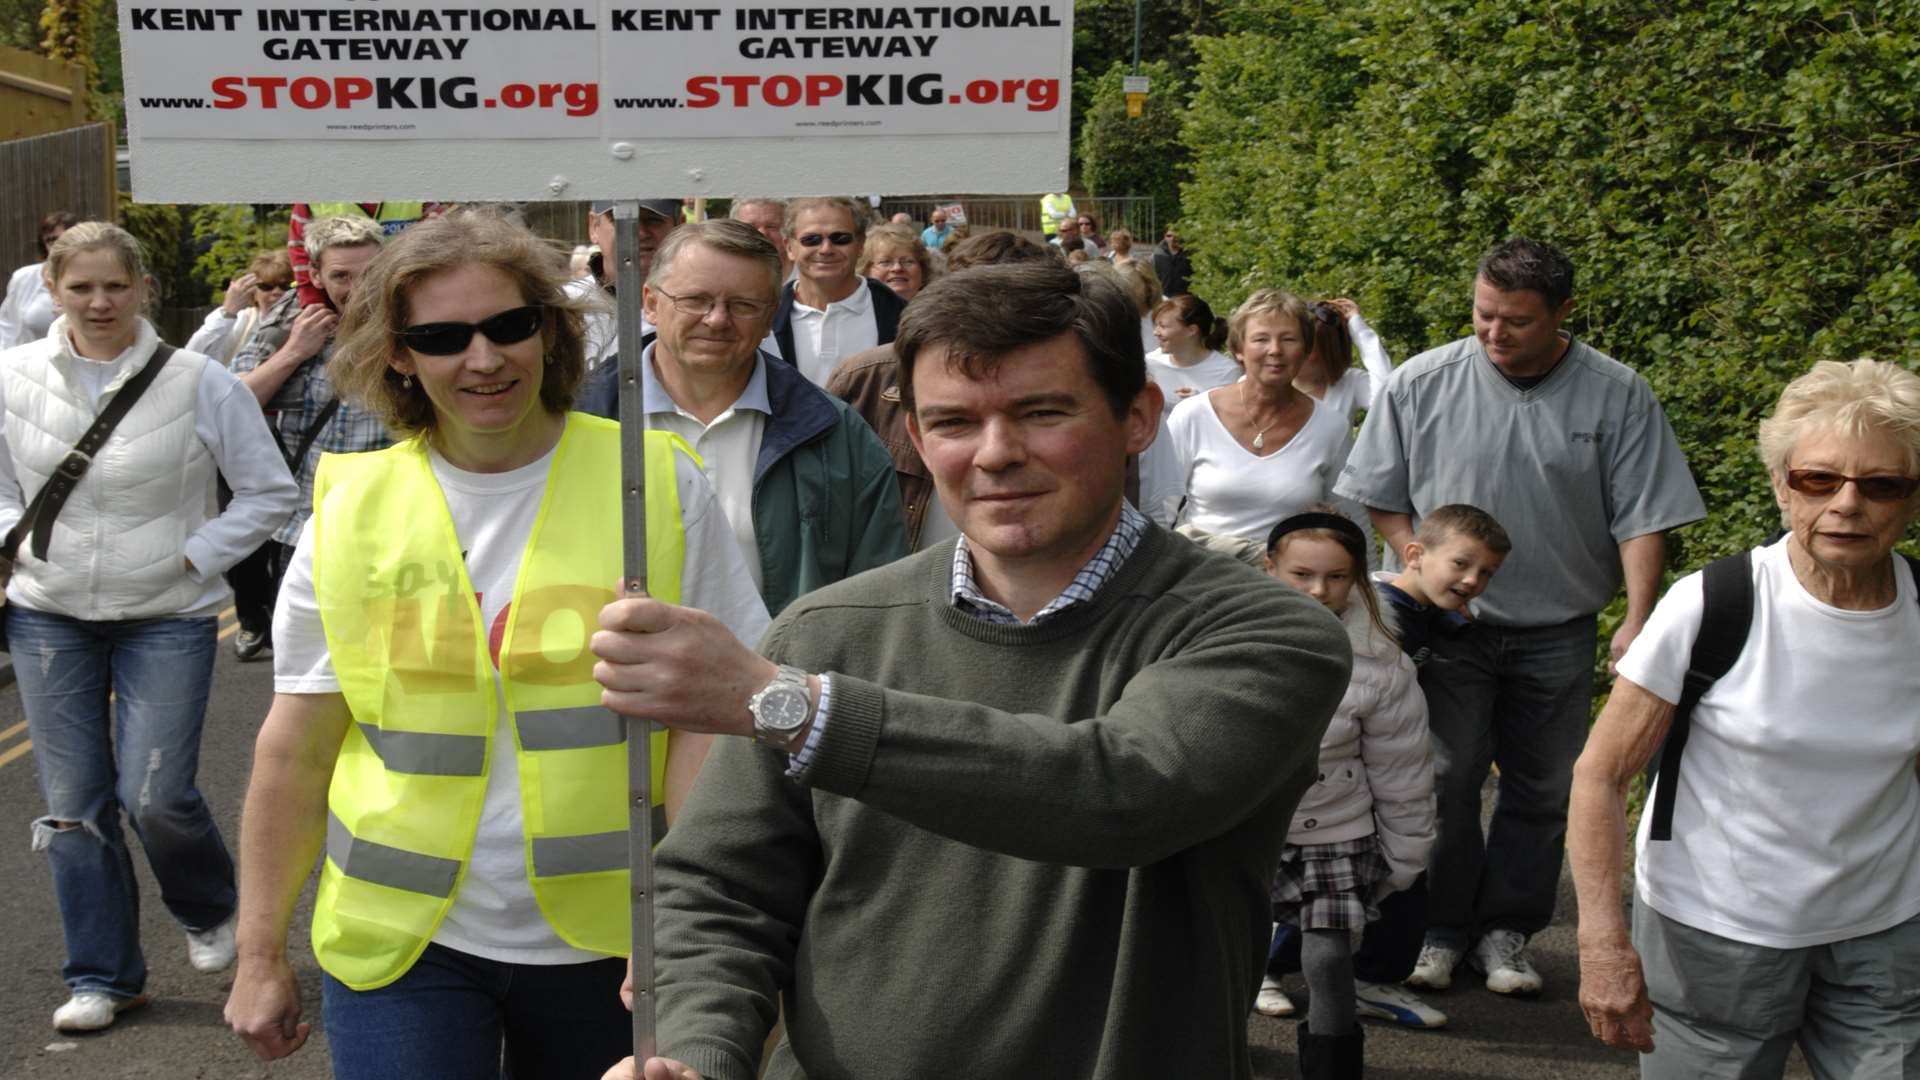 Sir Hugh Robertson MP in 2009 leading demonstrators against the KIG warehouse plan. He is to stand down at this year's General Election.